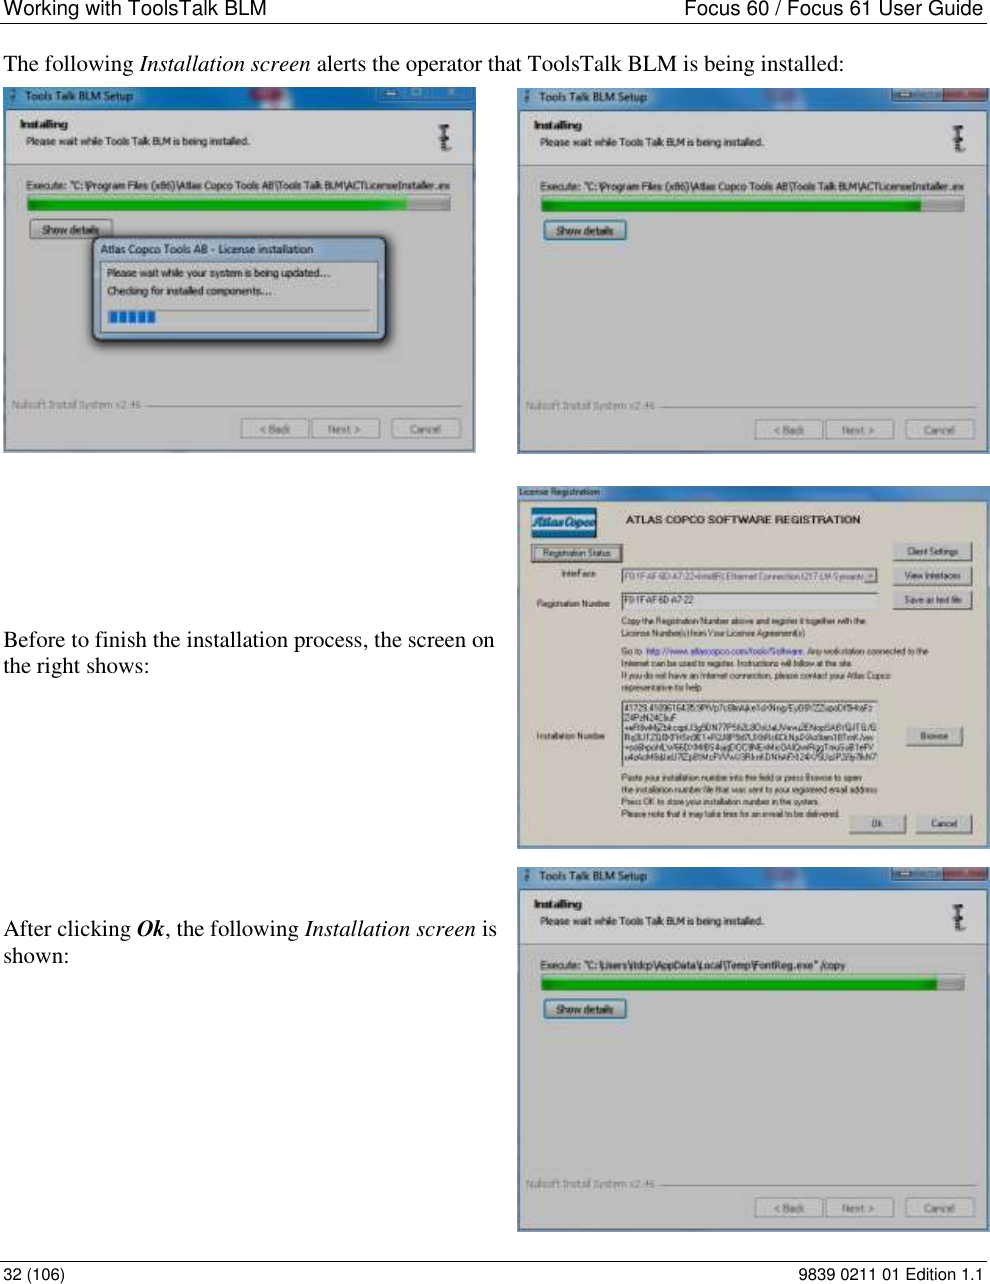 Working with ToolsTalk BLM  Focus 60 / Focus 61 User Guide 32 (106)  9839 0211 01 Edition 1.1 The following Installation screen alerts the operator that ToolsTalk BLM is being installed:        Before to finish the installation process, the screen on the right shows:          After clicking Ok, the following Installation screen is shown:          